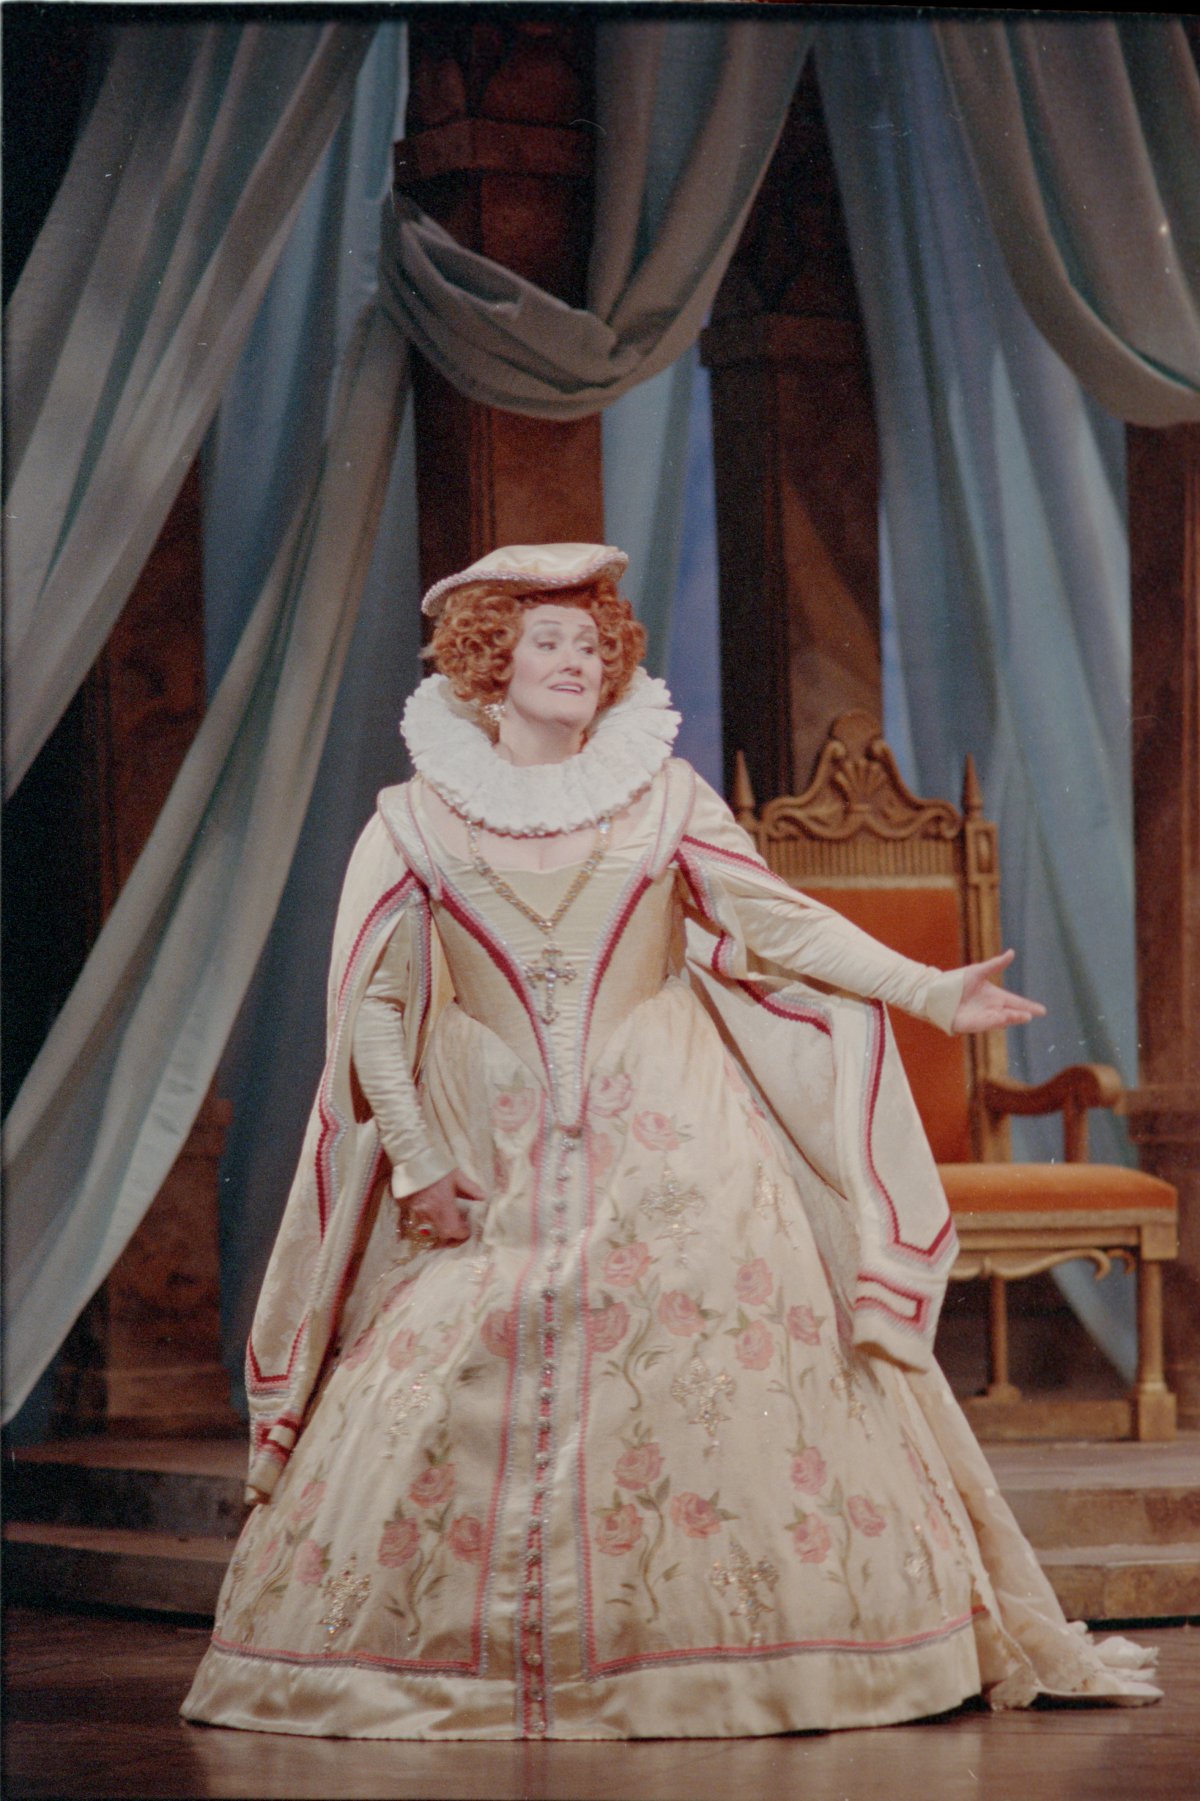 A picture of a woman on stage mid-performance. She is dressed in a large old-fashioned gown with ruffles. Behind her is a throne and heavy curtains